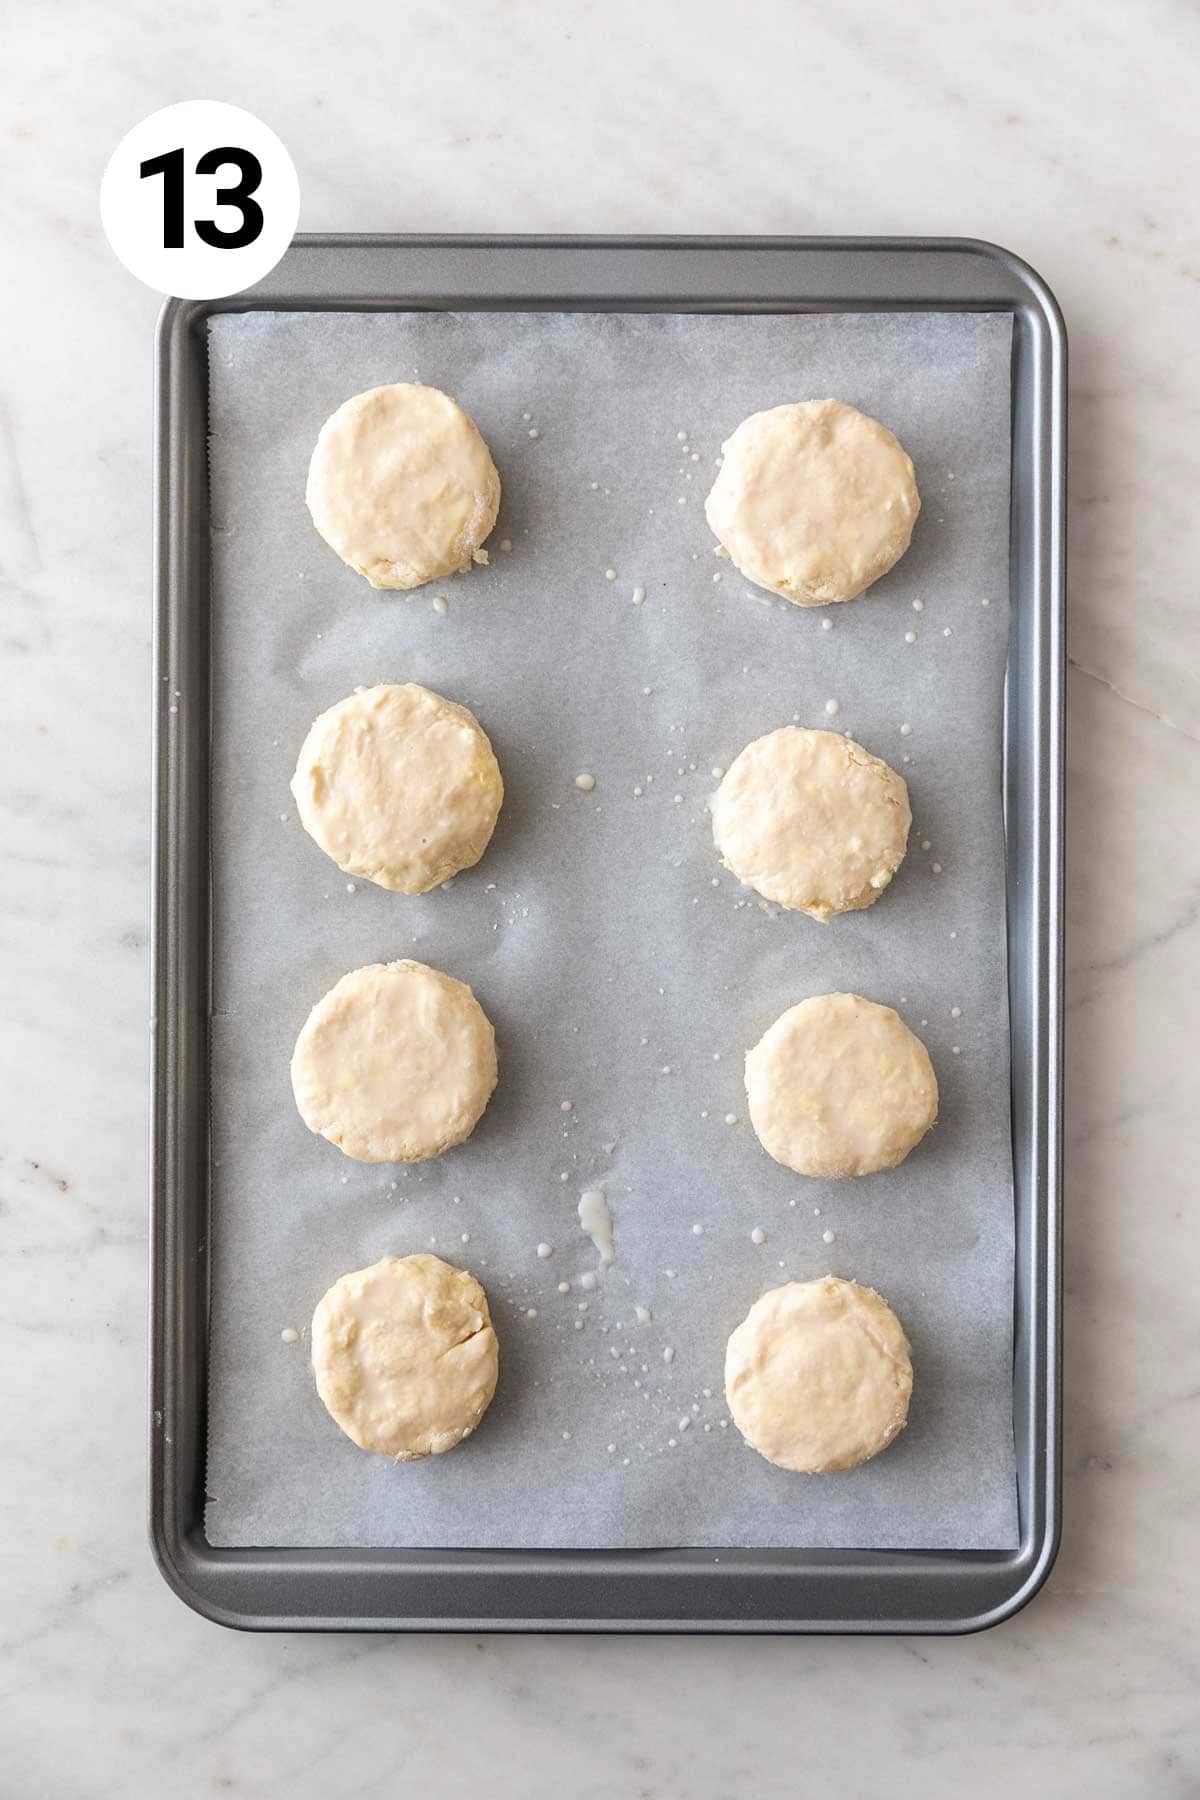 Vegan biscuits on a lined baking sheet before baking.